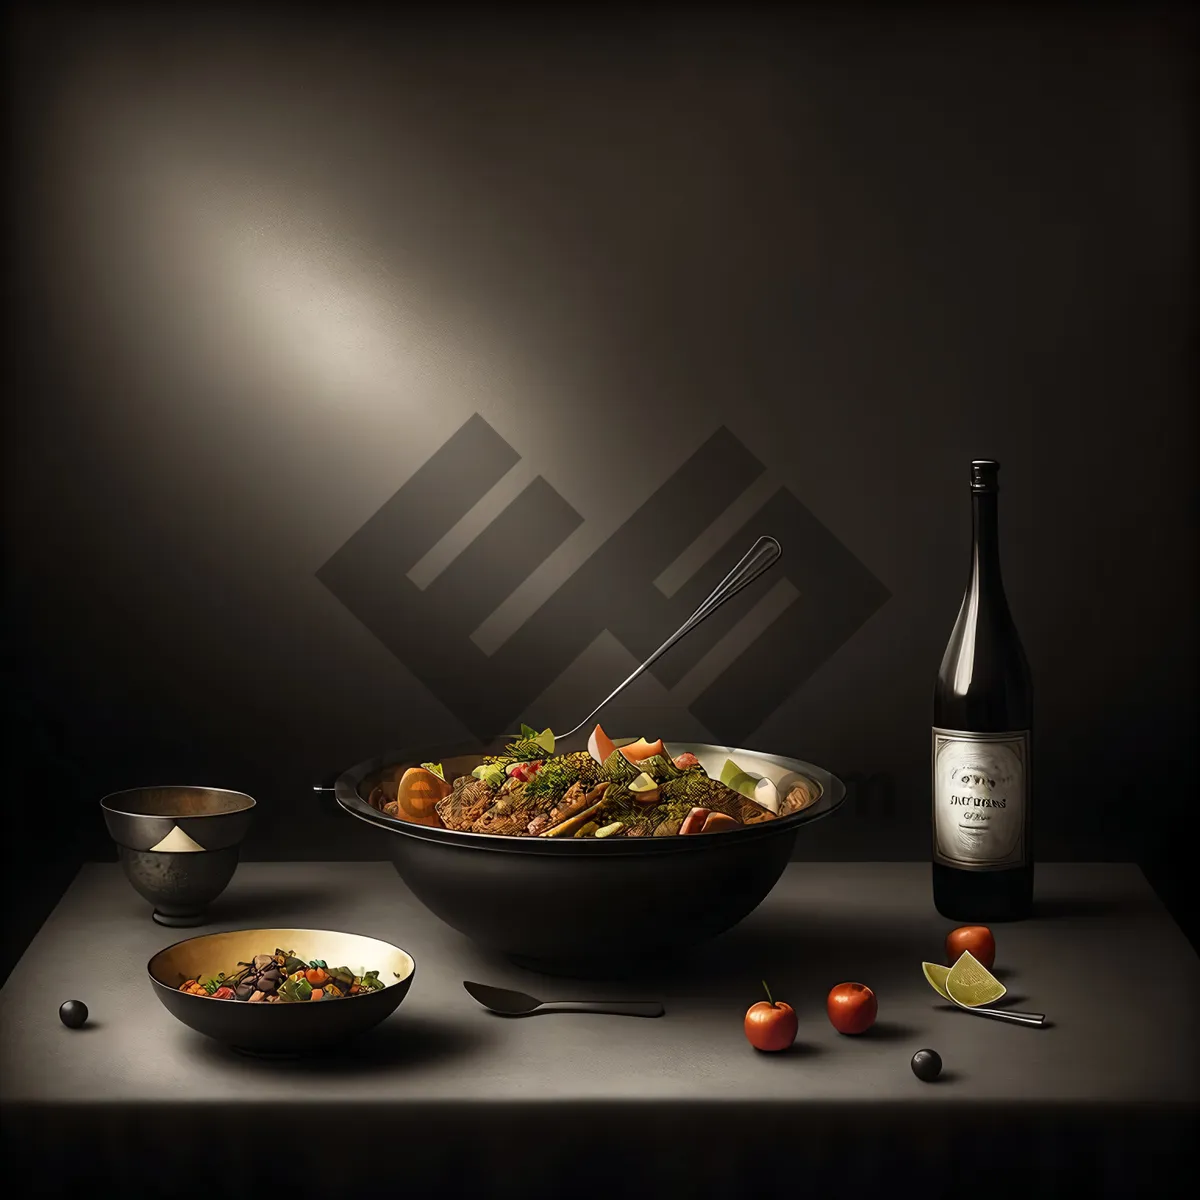 Picture of Cooking Bliss: Wok, Pan, Food, Wine and Glass